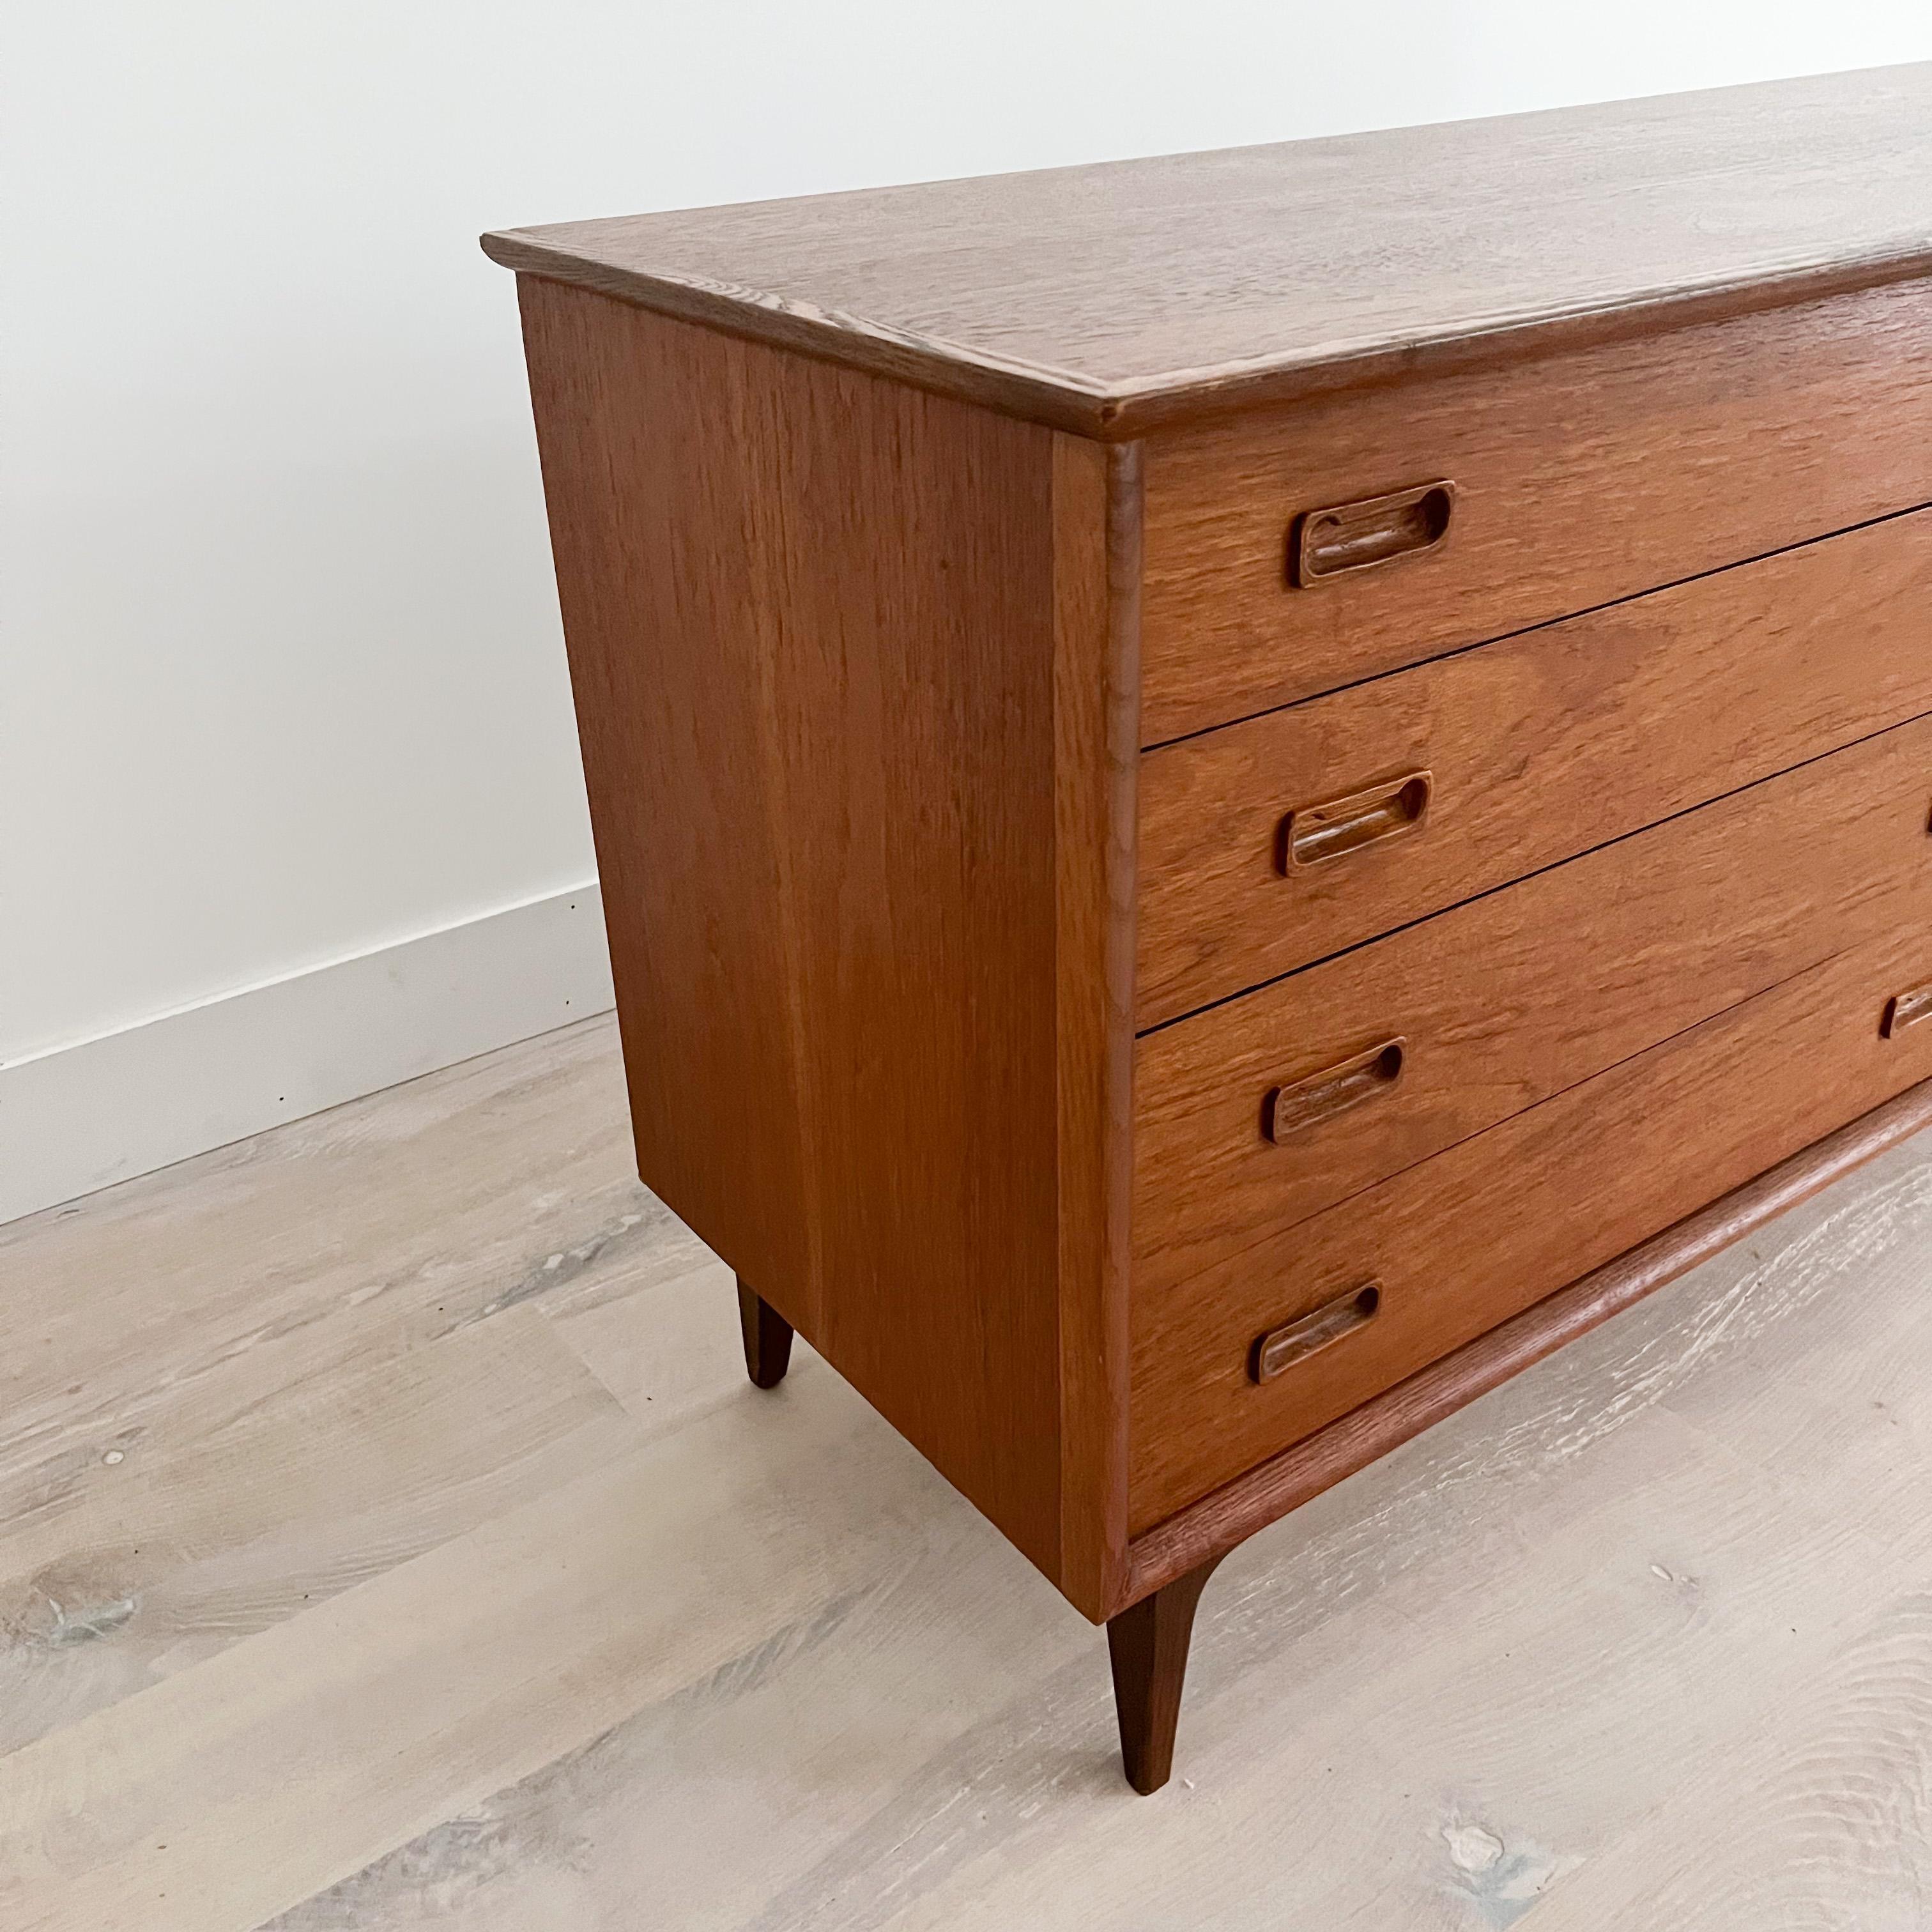 Mid-Century Modern Danish teak low 8 drawer dresser with oak trim. The top has been sanded and restored. Some light scuffing/scratching from age appropriate wear.